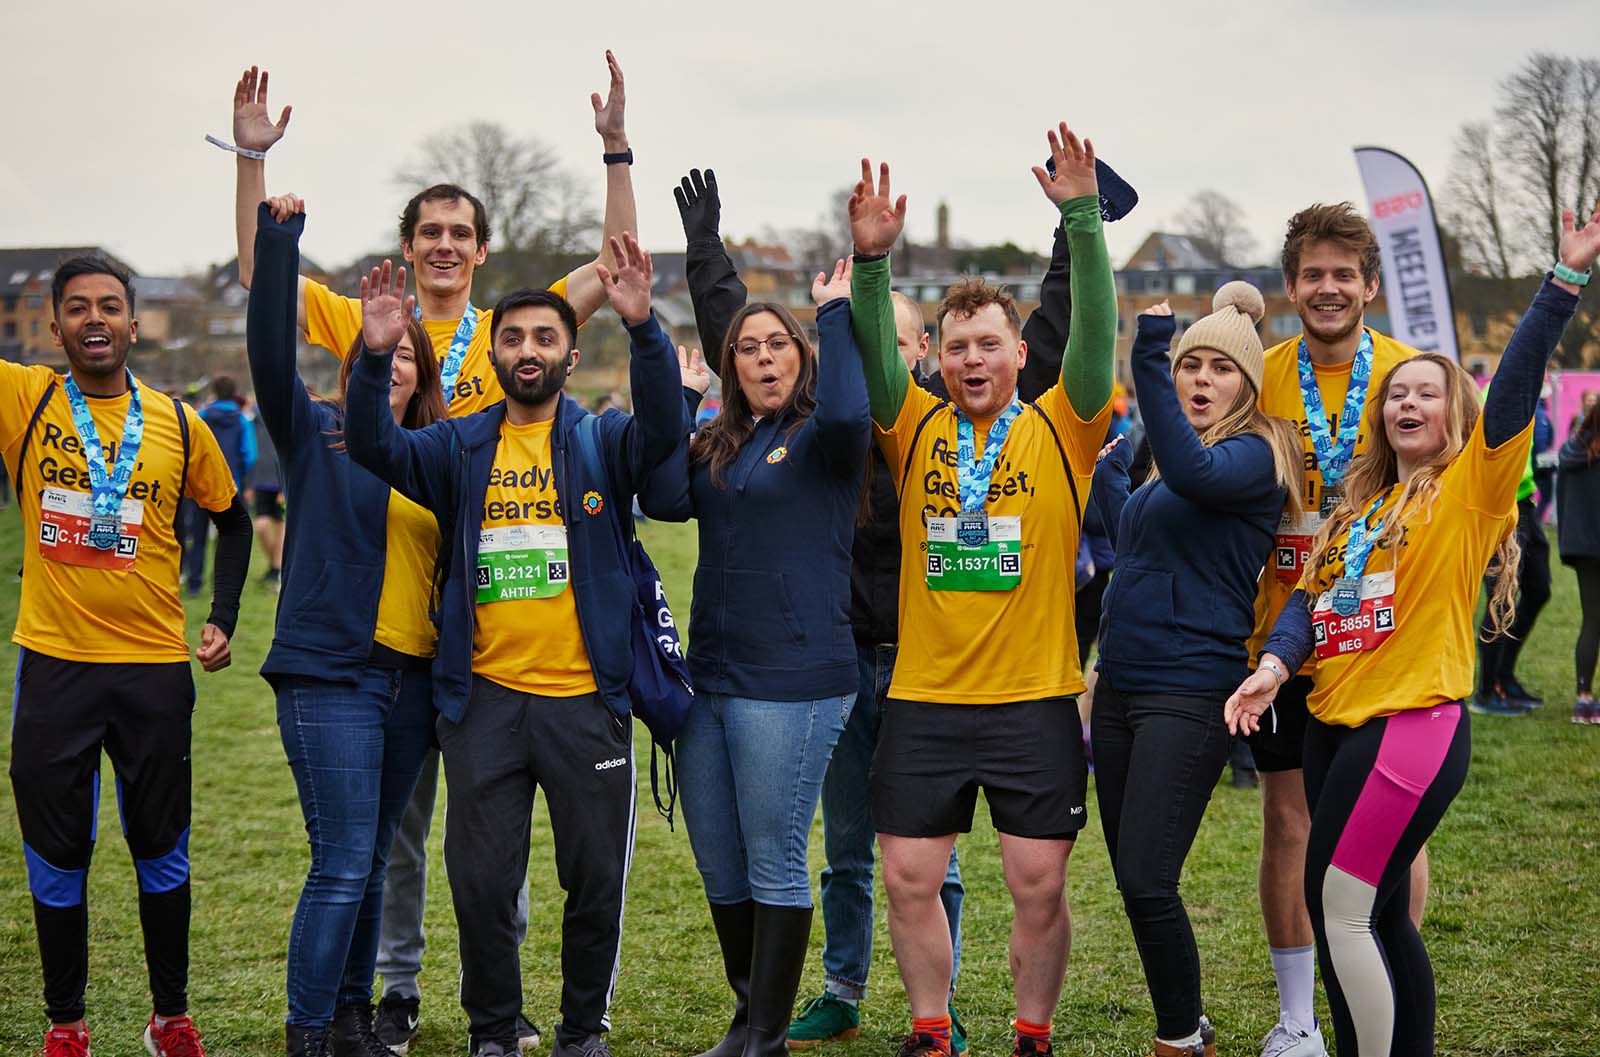 A wonderful group from Gearset ran the Cambridge Half Marathon 2023 — an event sponsored by Gearset